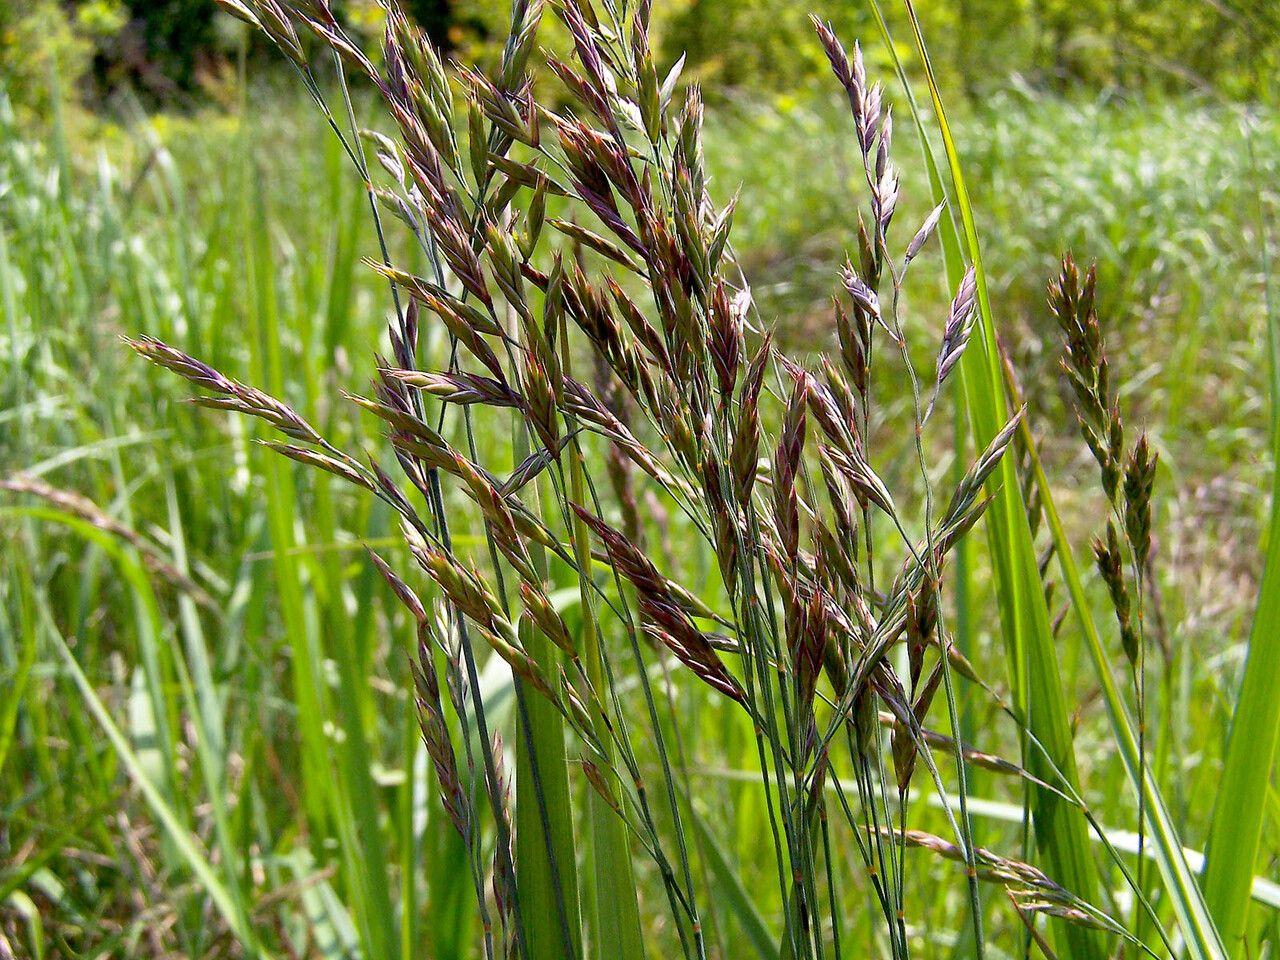 burgundy-green spikelets with green foliage and stems